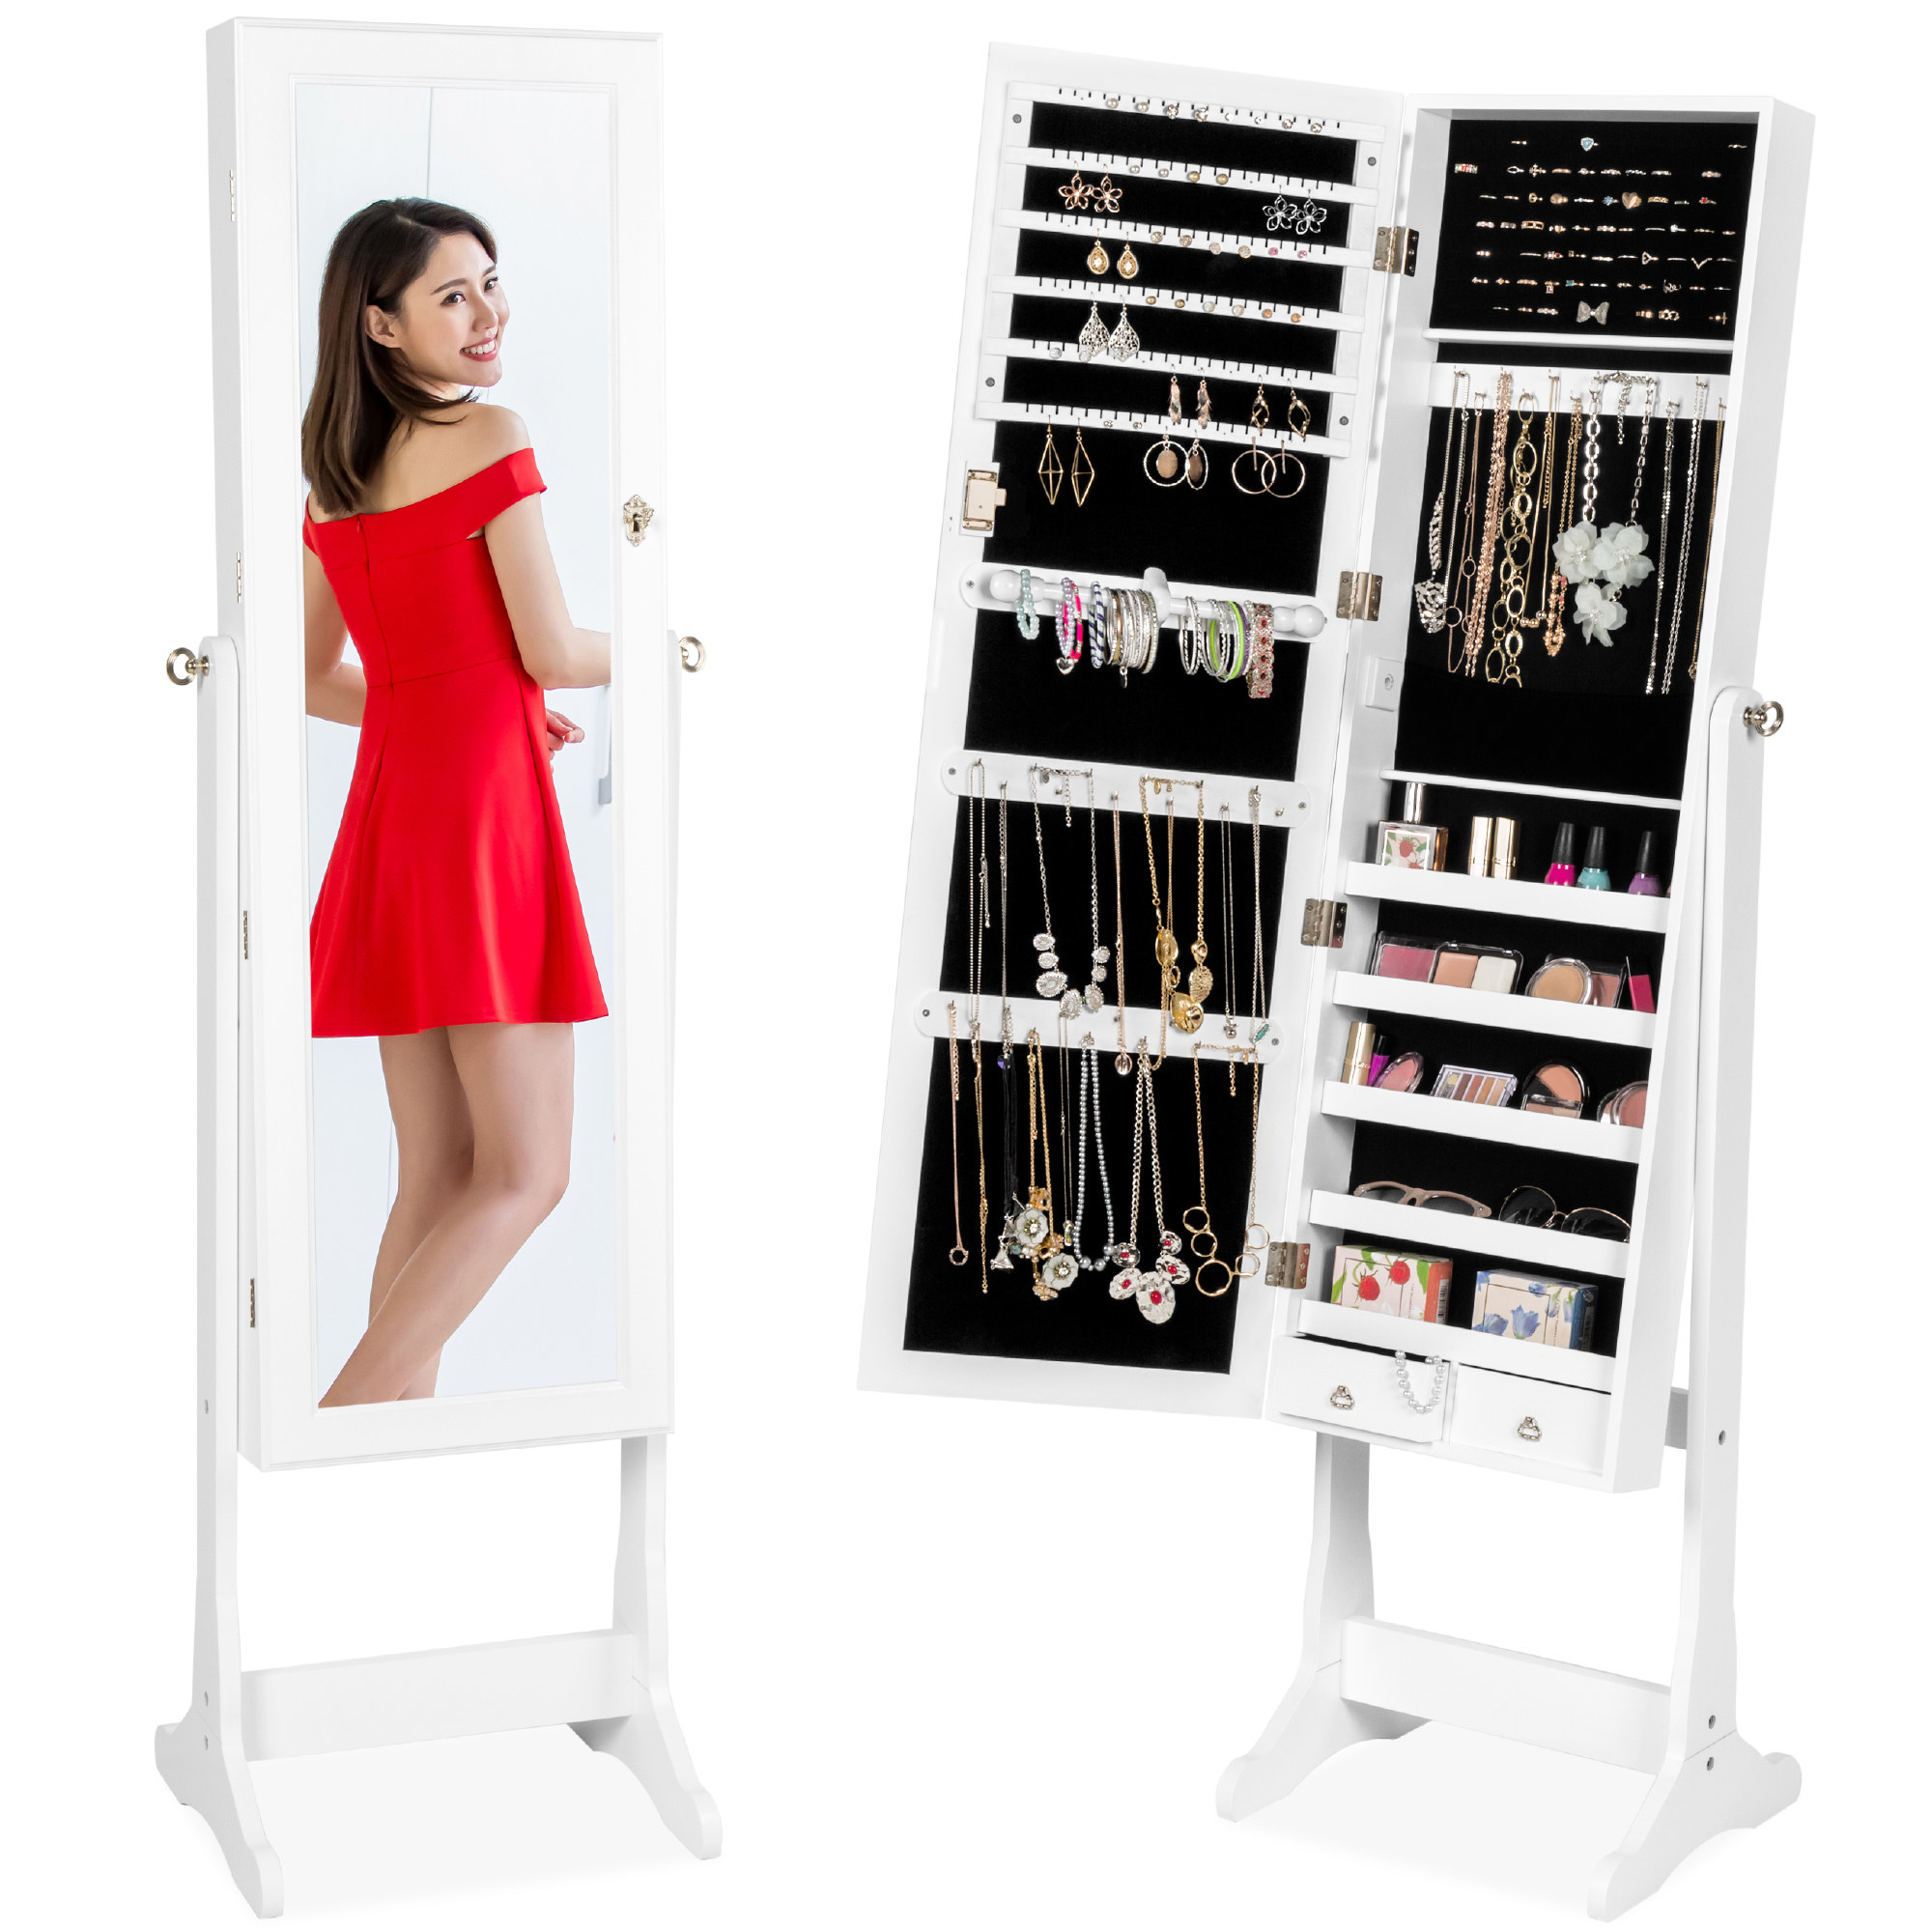 the white mirror open showing all the available storage and closed with a model standing in front